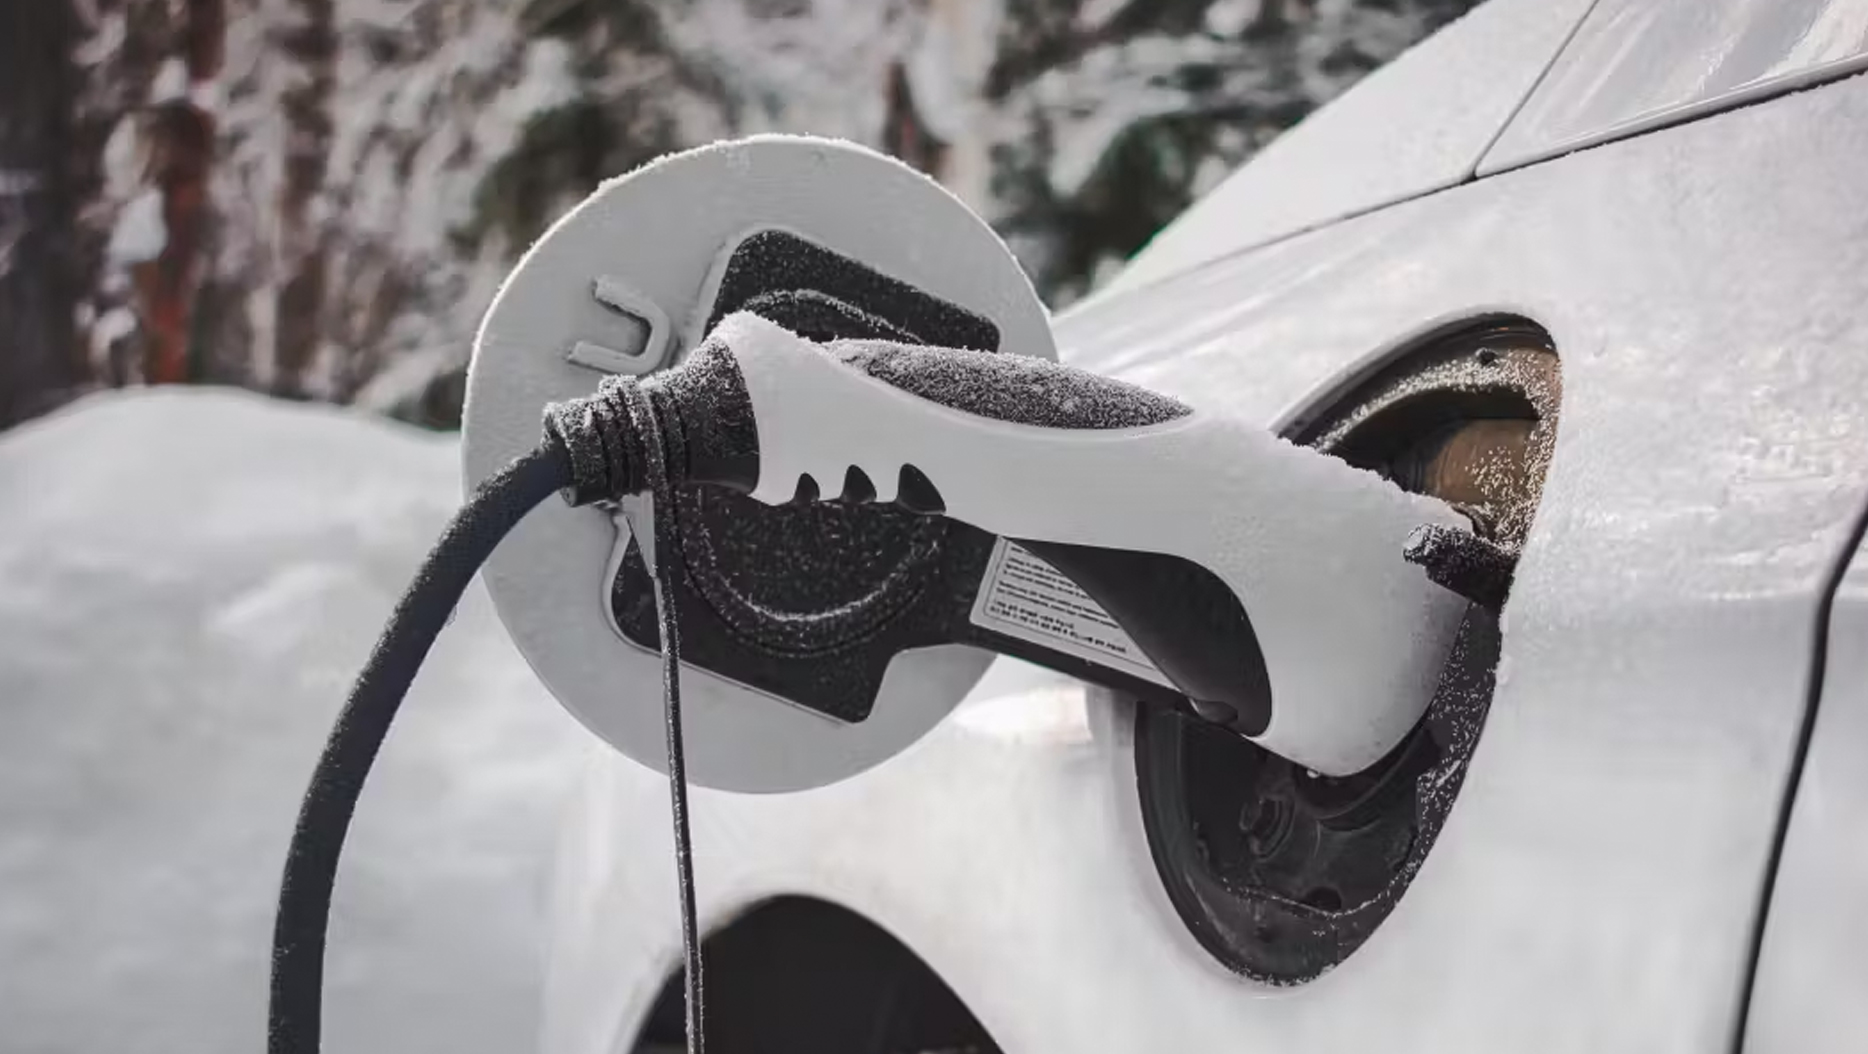 EV charge lead plugged into white car in snow